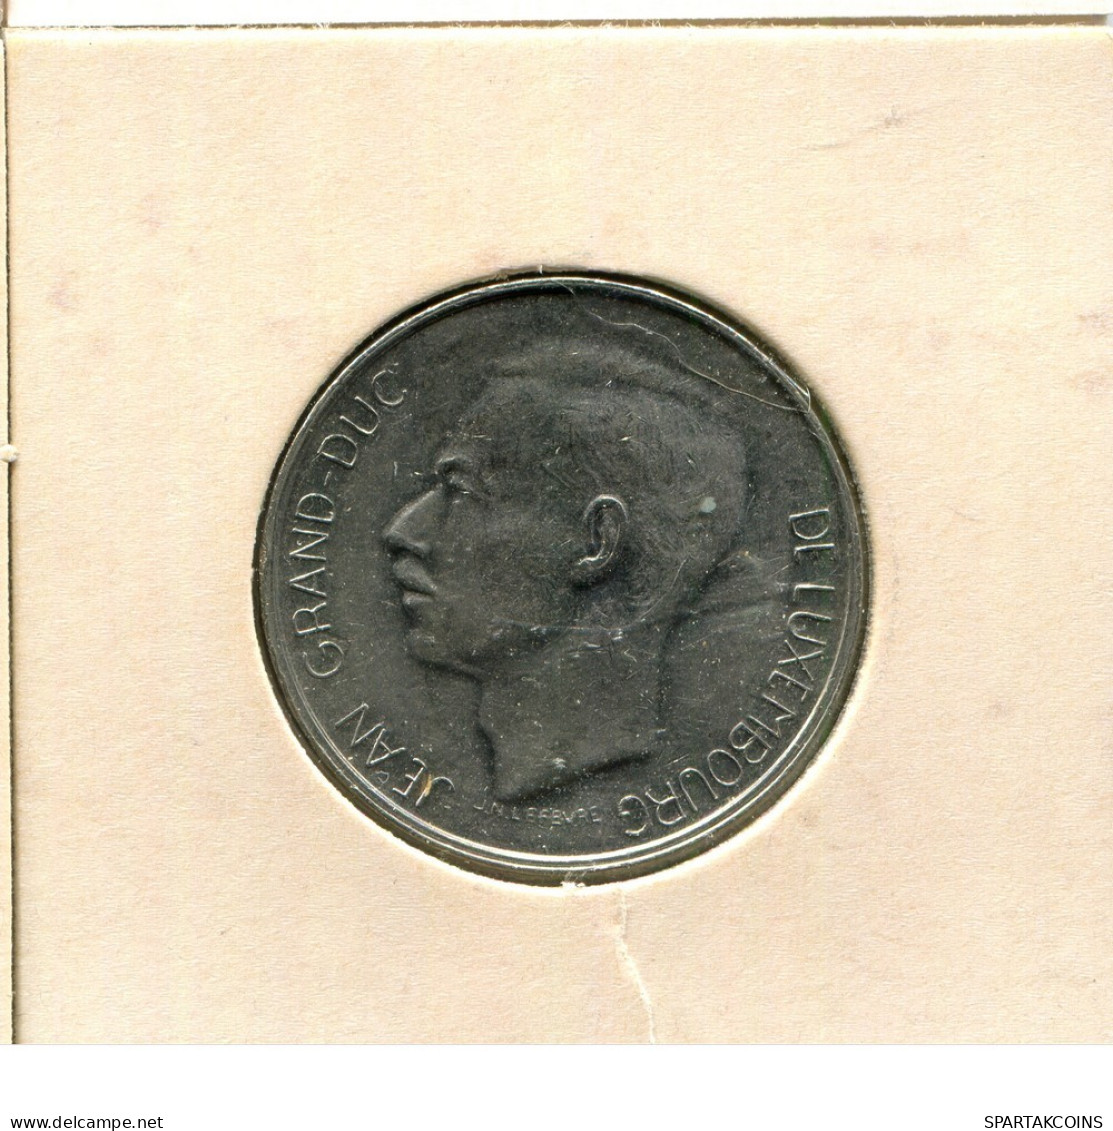 10 FRANCS 1971 LUXEMBURGO LUXEMBOURG Moneda #AT238.E.A - Luxembourg